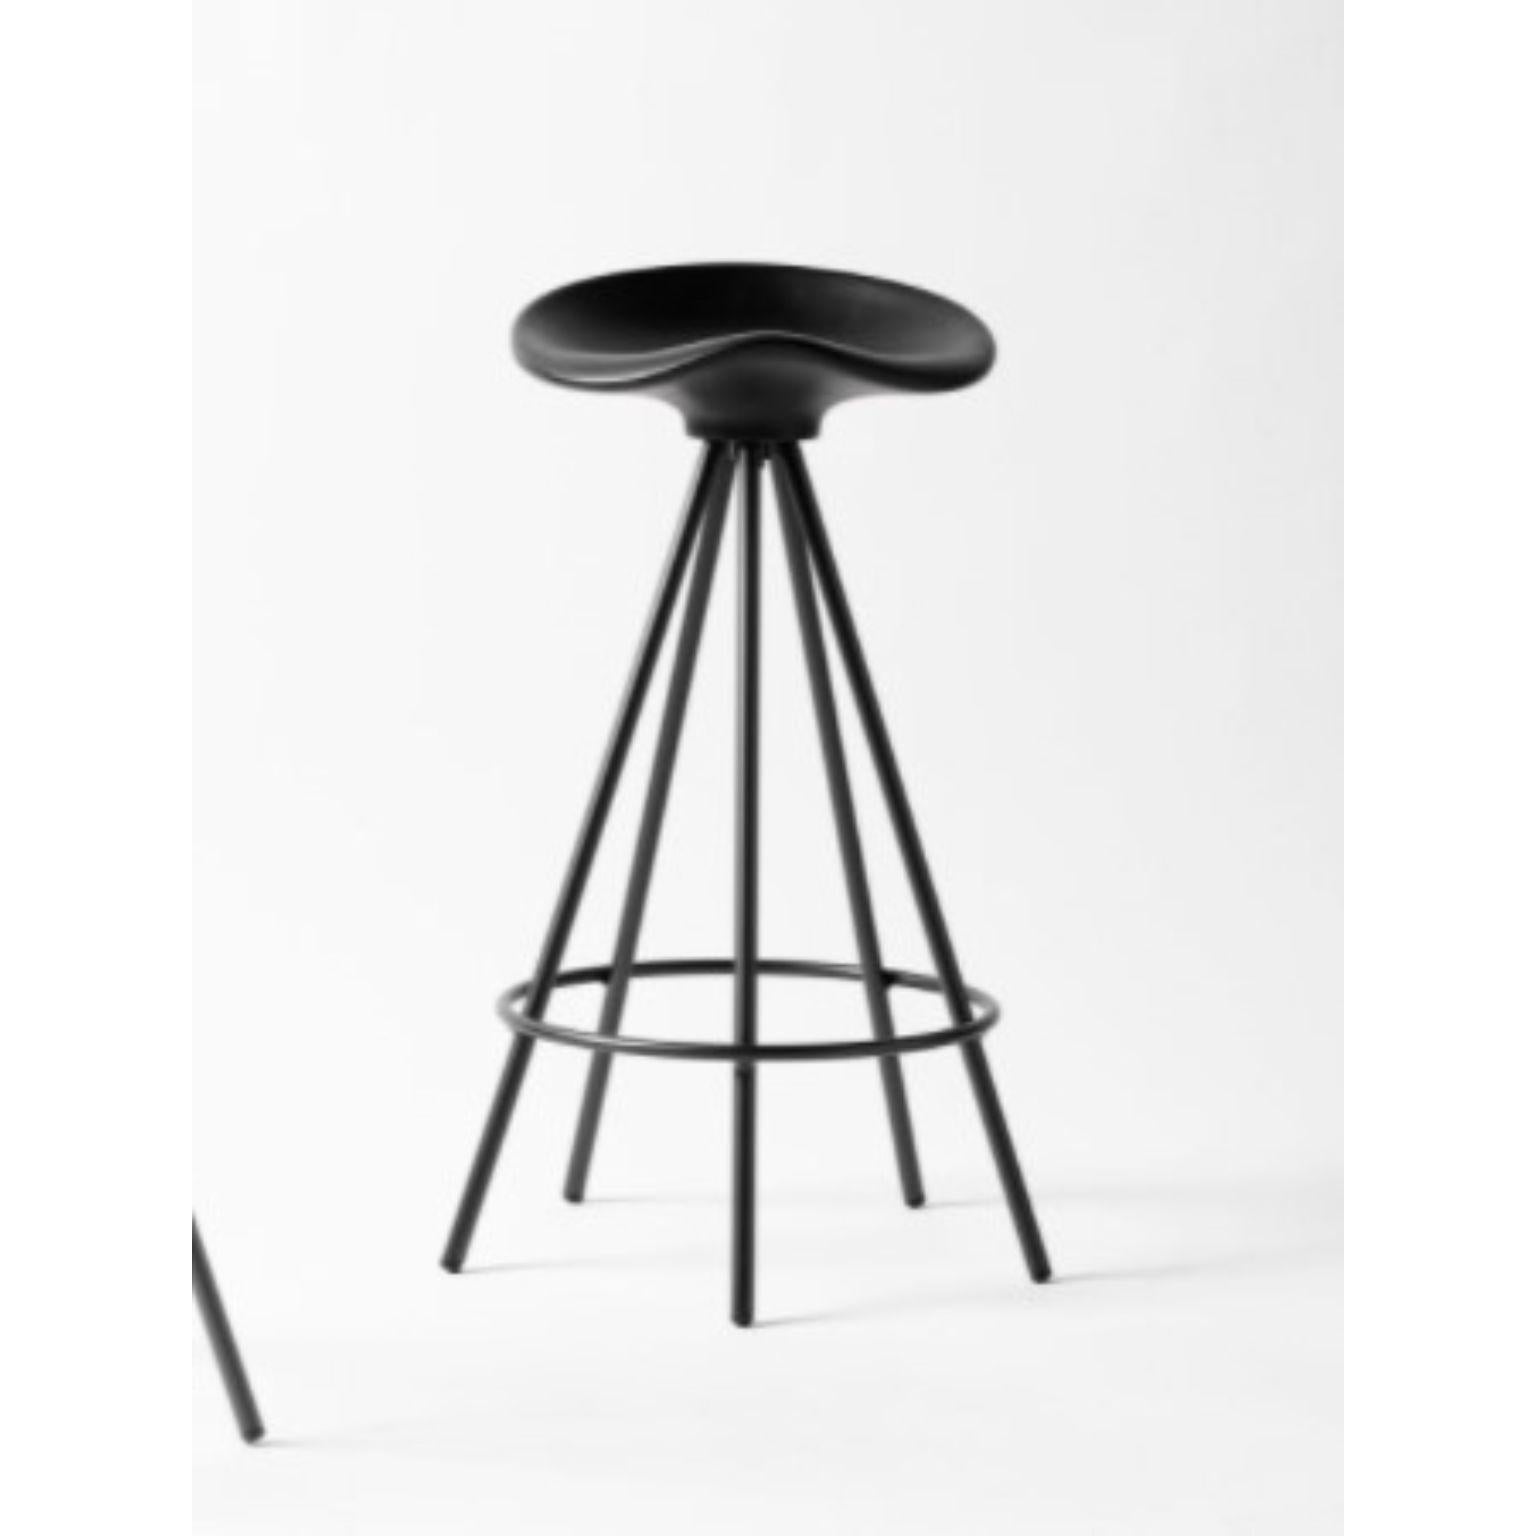 Jamaica All black stool by Pepe Cortes
Dimensions: Diameter 51 x Height 78 cm 
Materials: A steel chromed five-legged stool. Swivel seat in a bright polished cast aluminum AG3 and anodized silver, or integrated with a solid varnished beech wooden